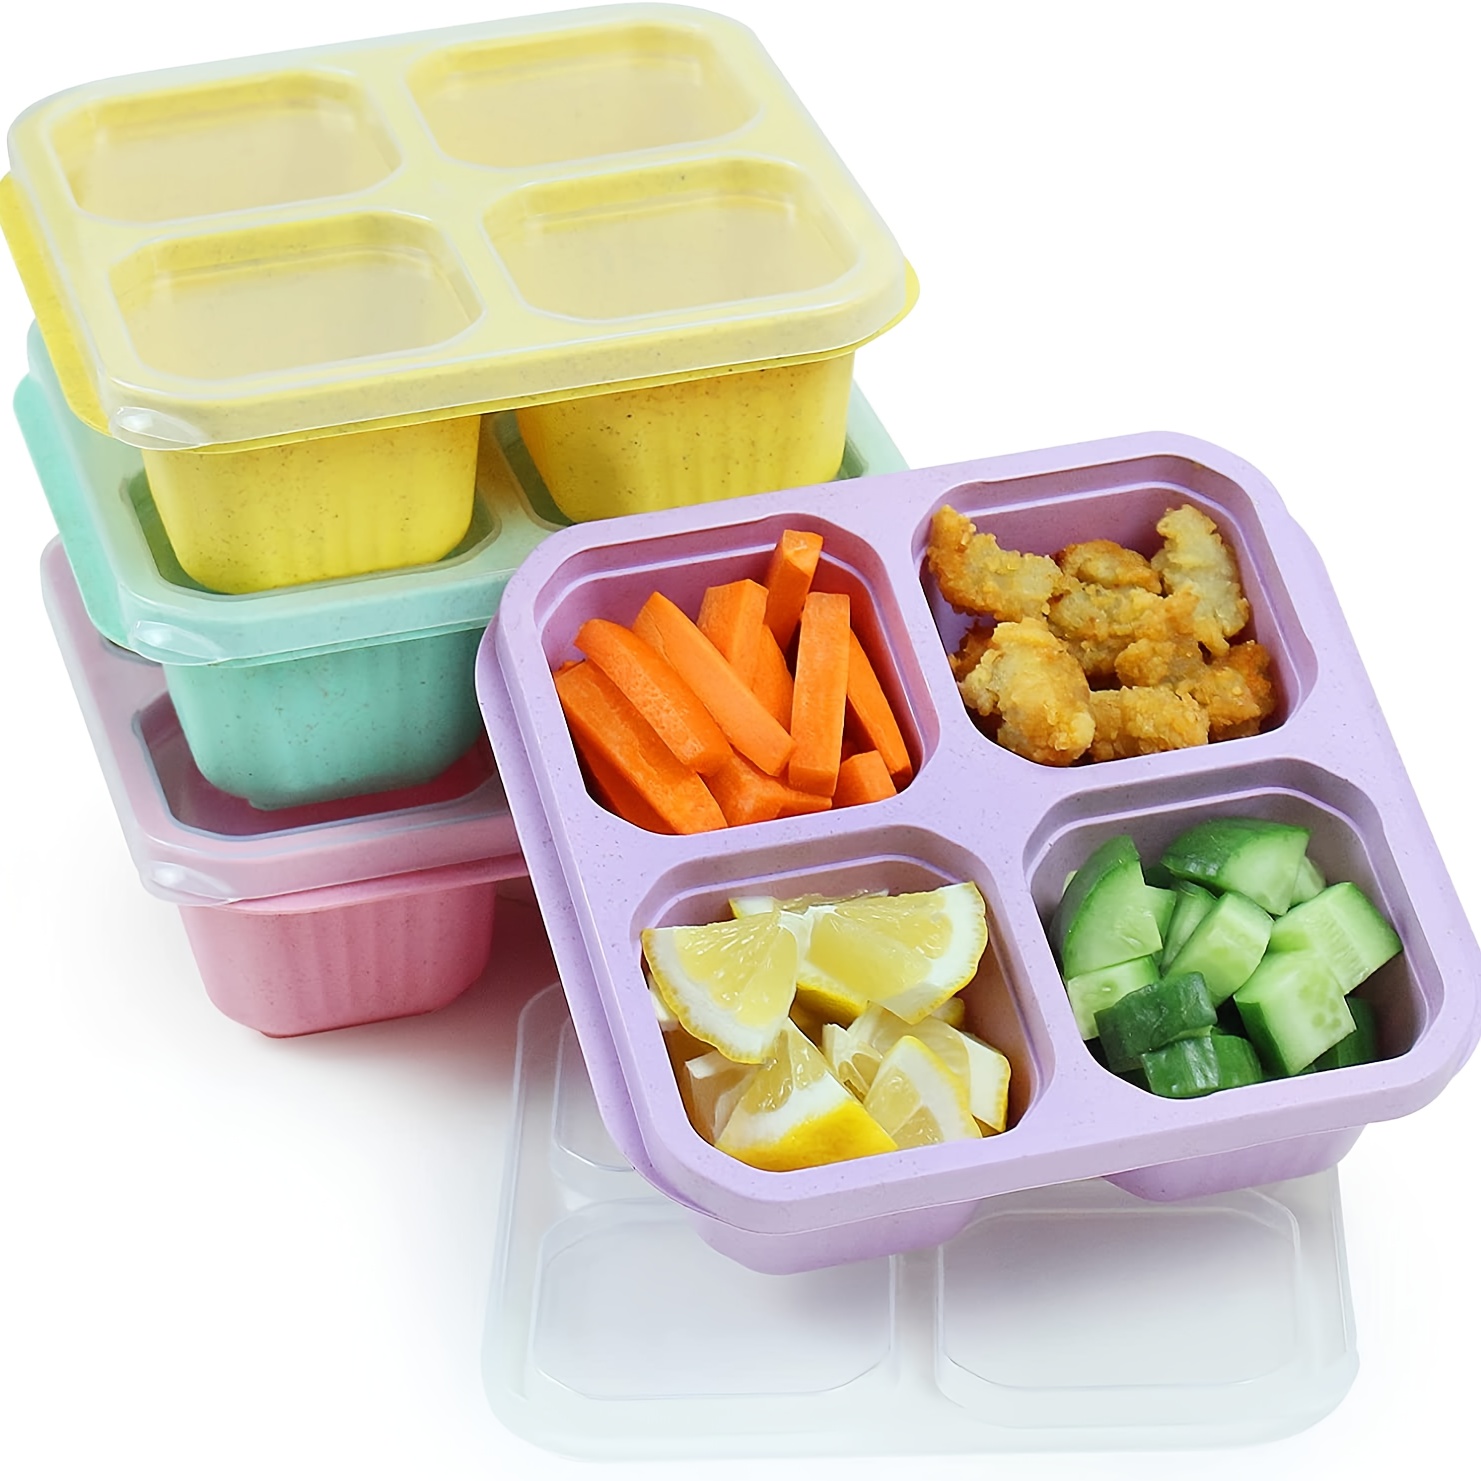 EasyLunchboxes - Bento Snack Boxes - Reusable 4-Compartment Food Containers  for School, Work and Travel, Set of 4, Classic